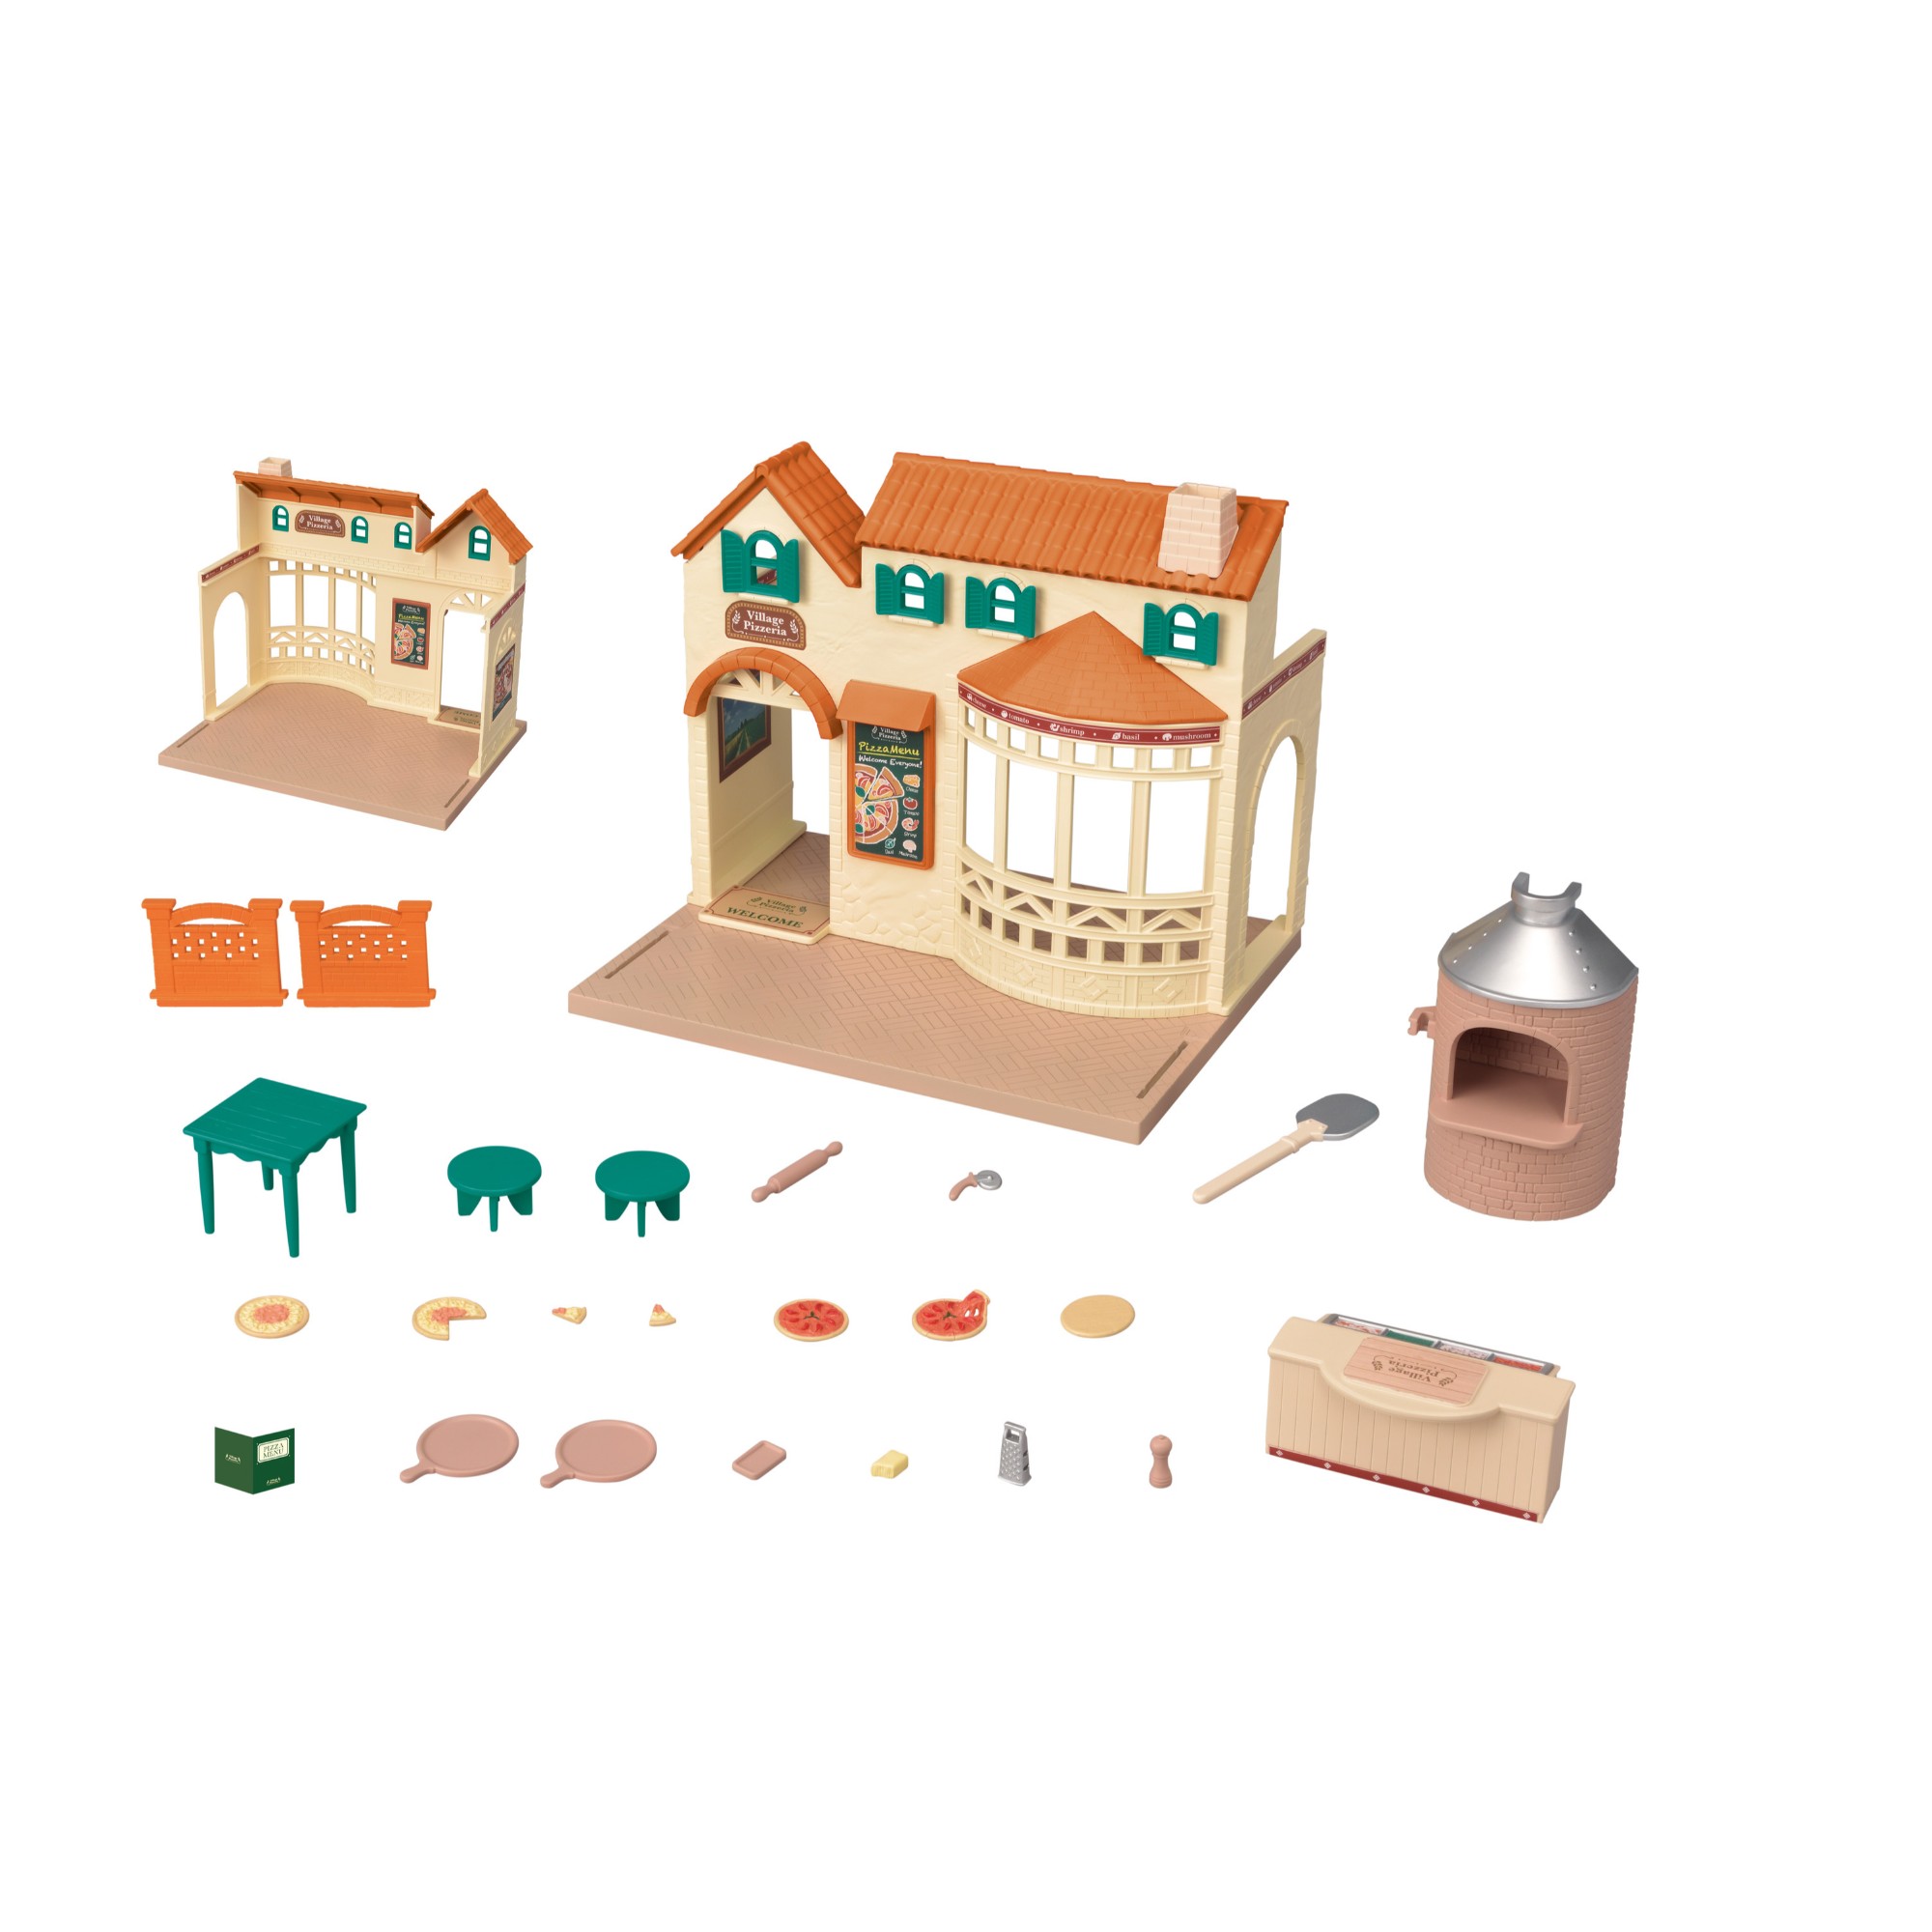 Calico Critters Village Pizzeria Dollhouse Playset, Collectible Dollhouse Toy with Furniture and Accessories Included - image 1 of 3